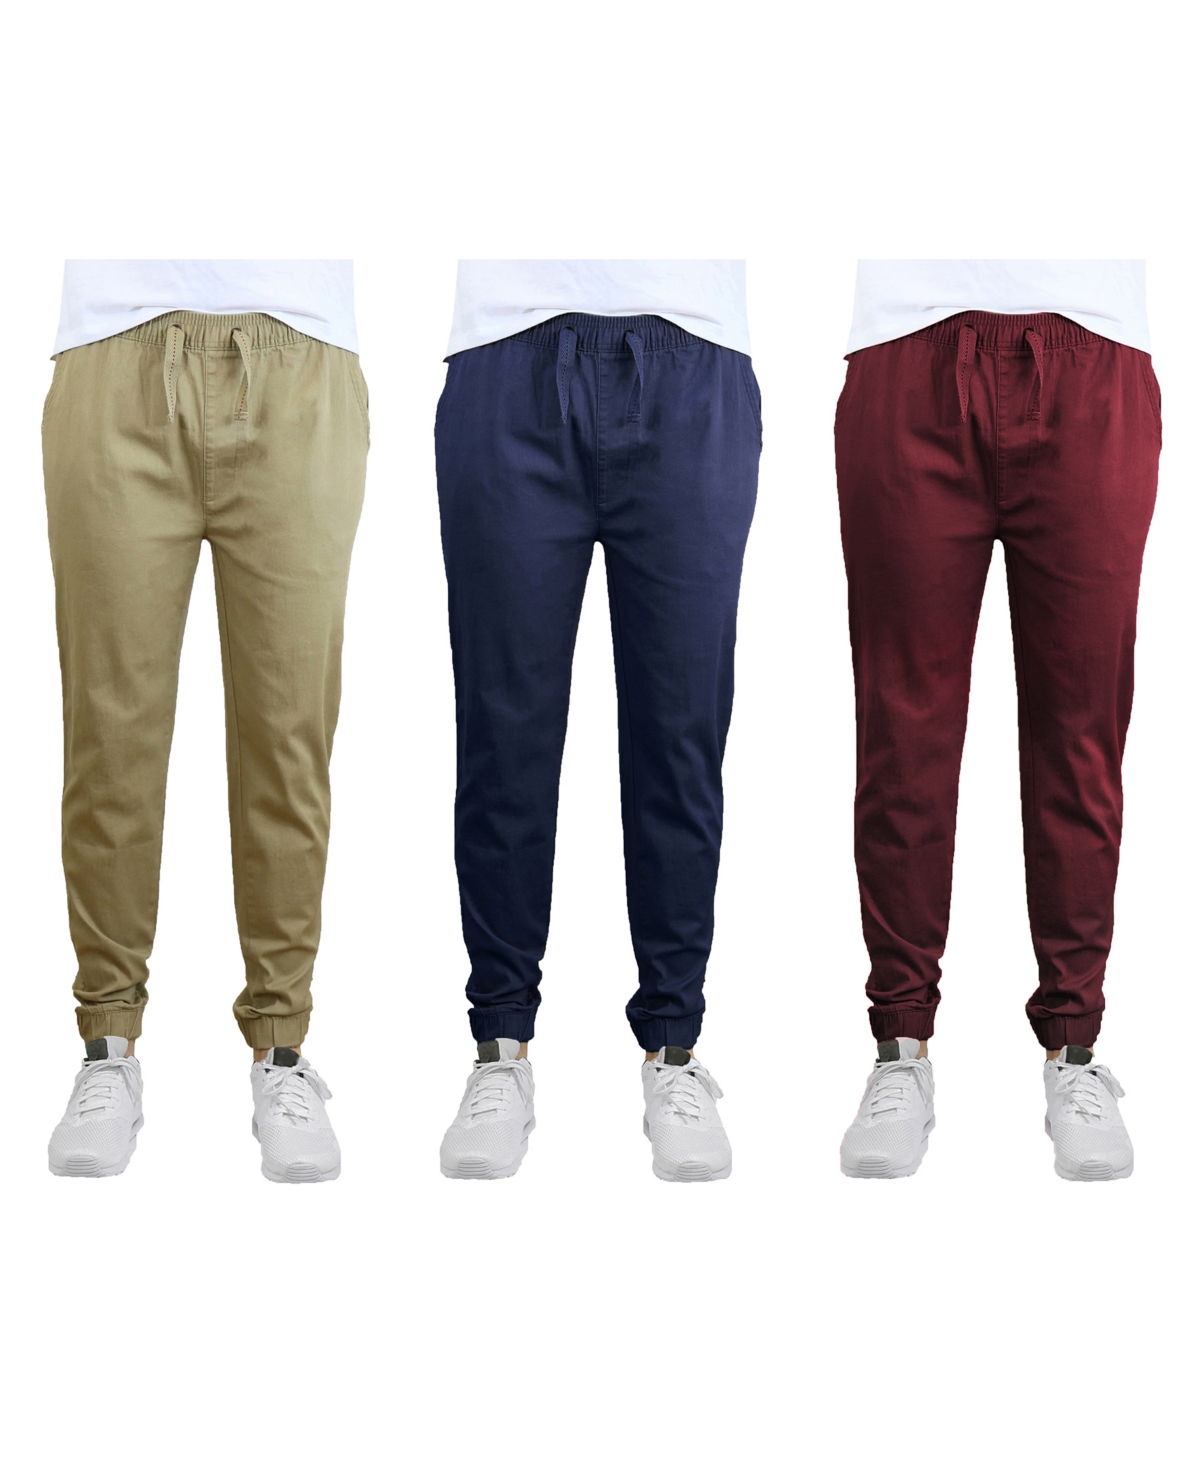 Shop Galaxy By Harvic Men's Slim Fit Basic Stretch Twill Joggers, Pack Of 3 In Khaki,navy And Burgundy